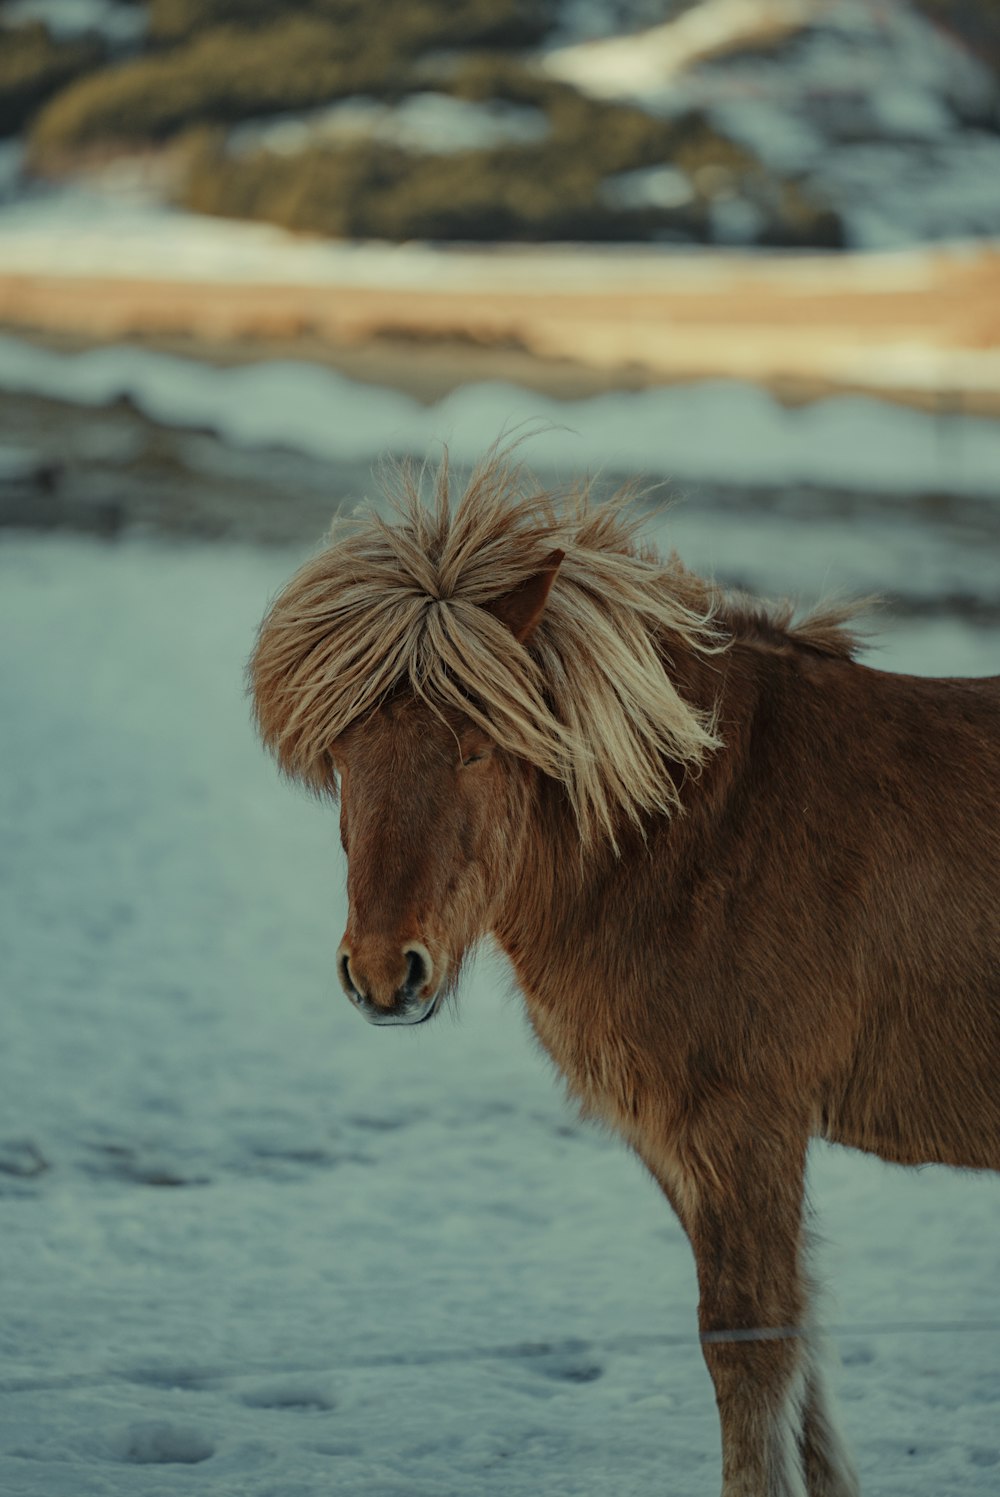 a brown horse with blonde hair standing in the snow